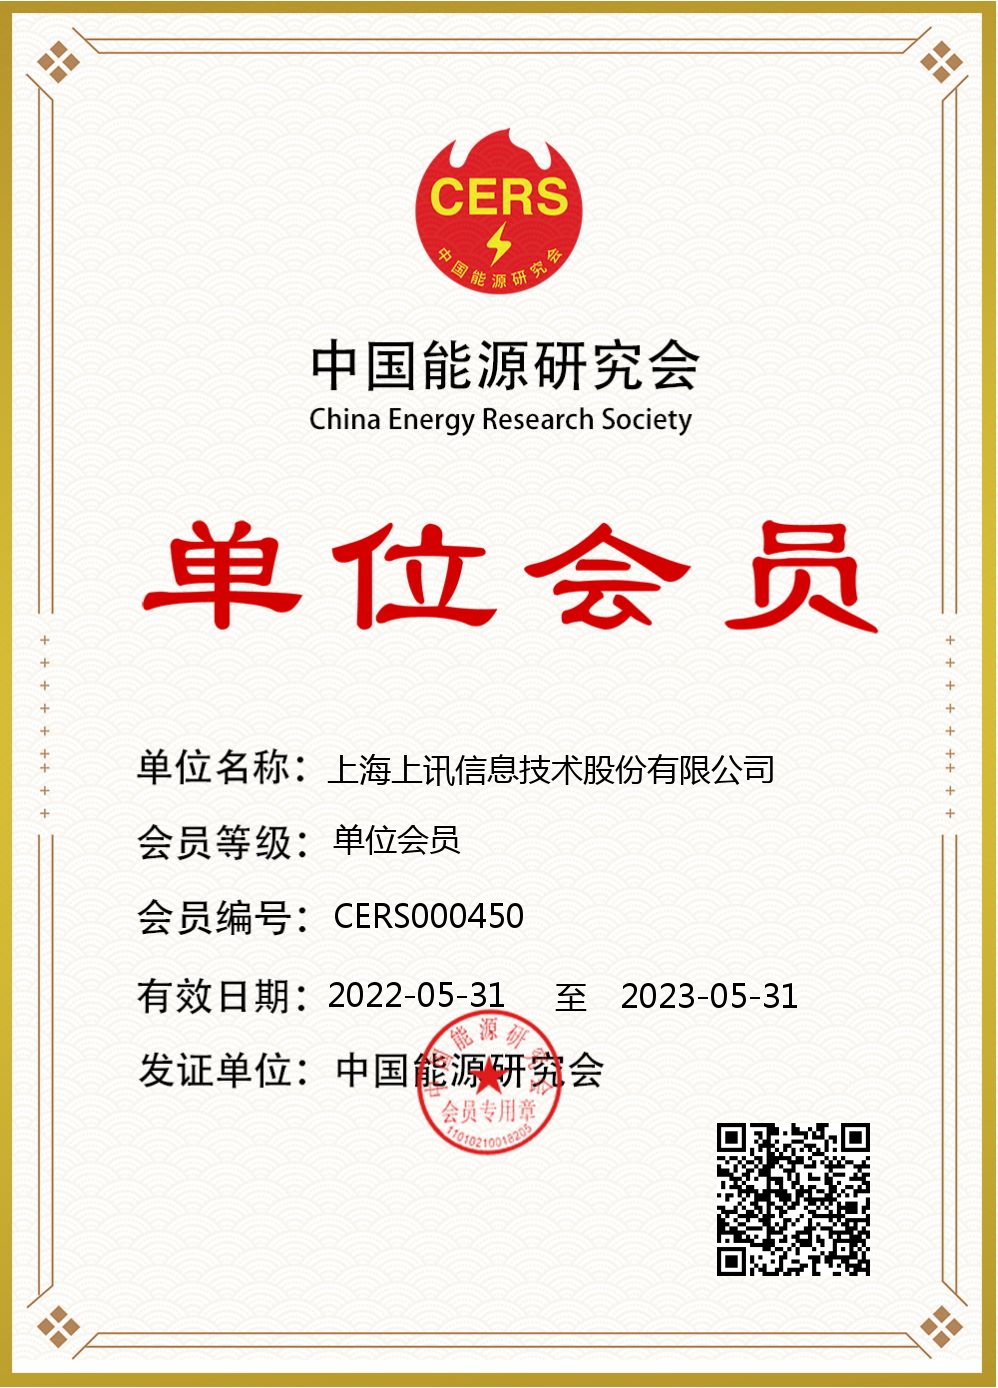 Member of China Energy Research Association